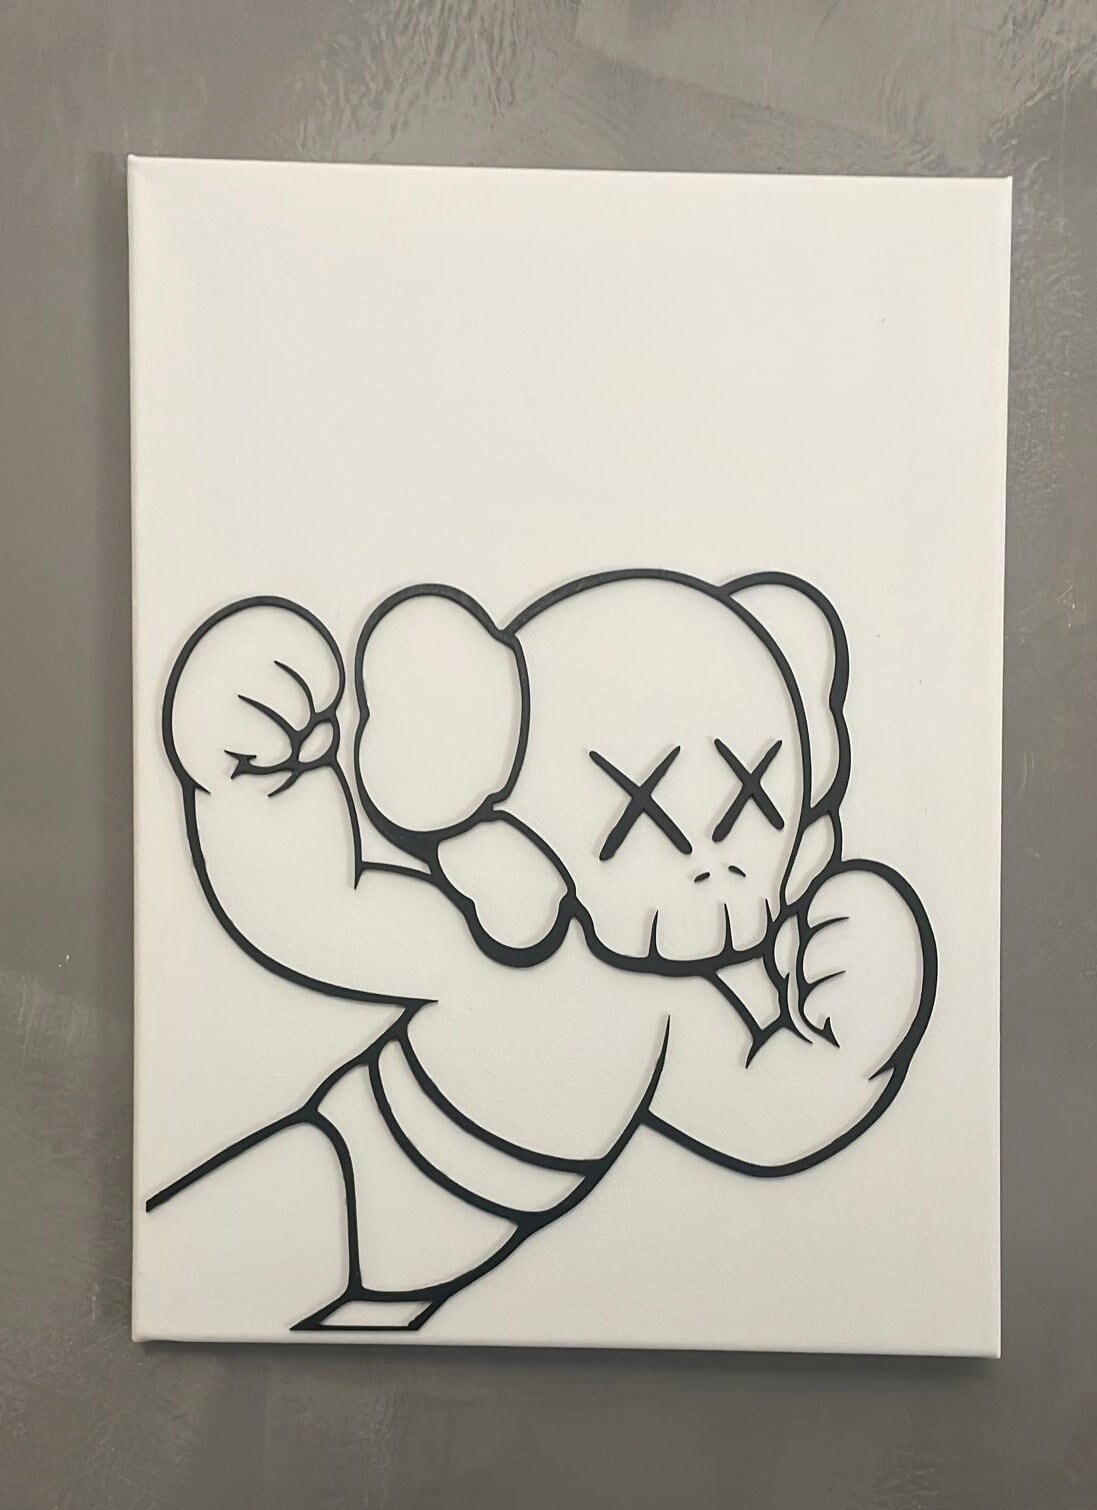 Kaws (Brian Donnelly) - Mousepad (pink) - Art object - Artwork screen  printed